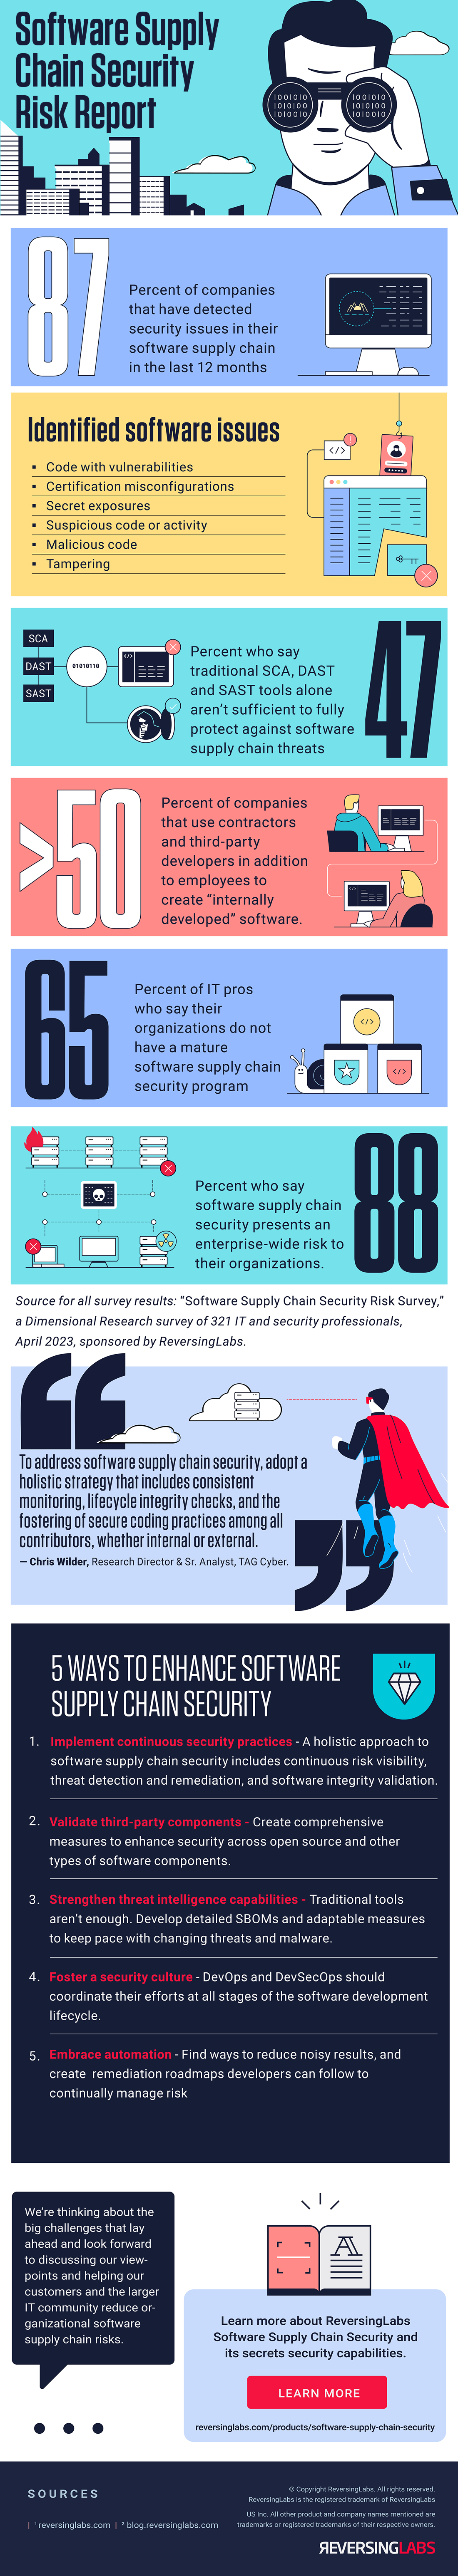 Software Supply Chain Security Risk Survey Report